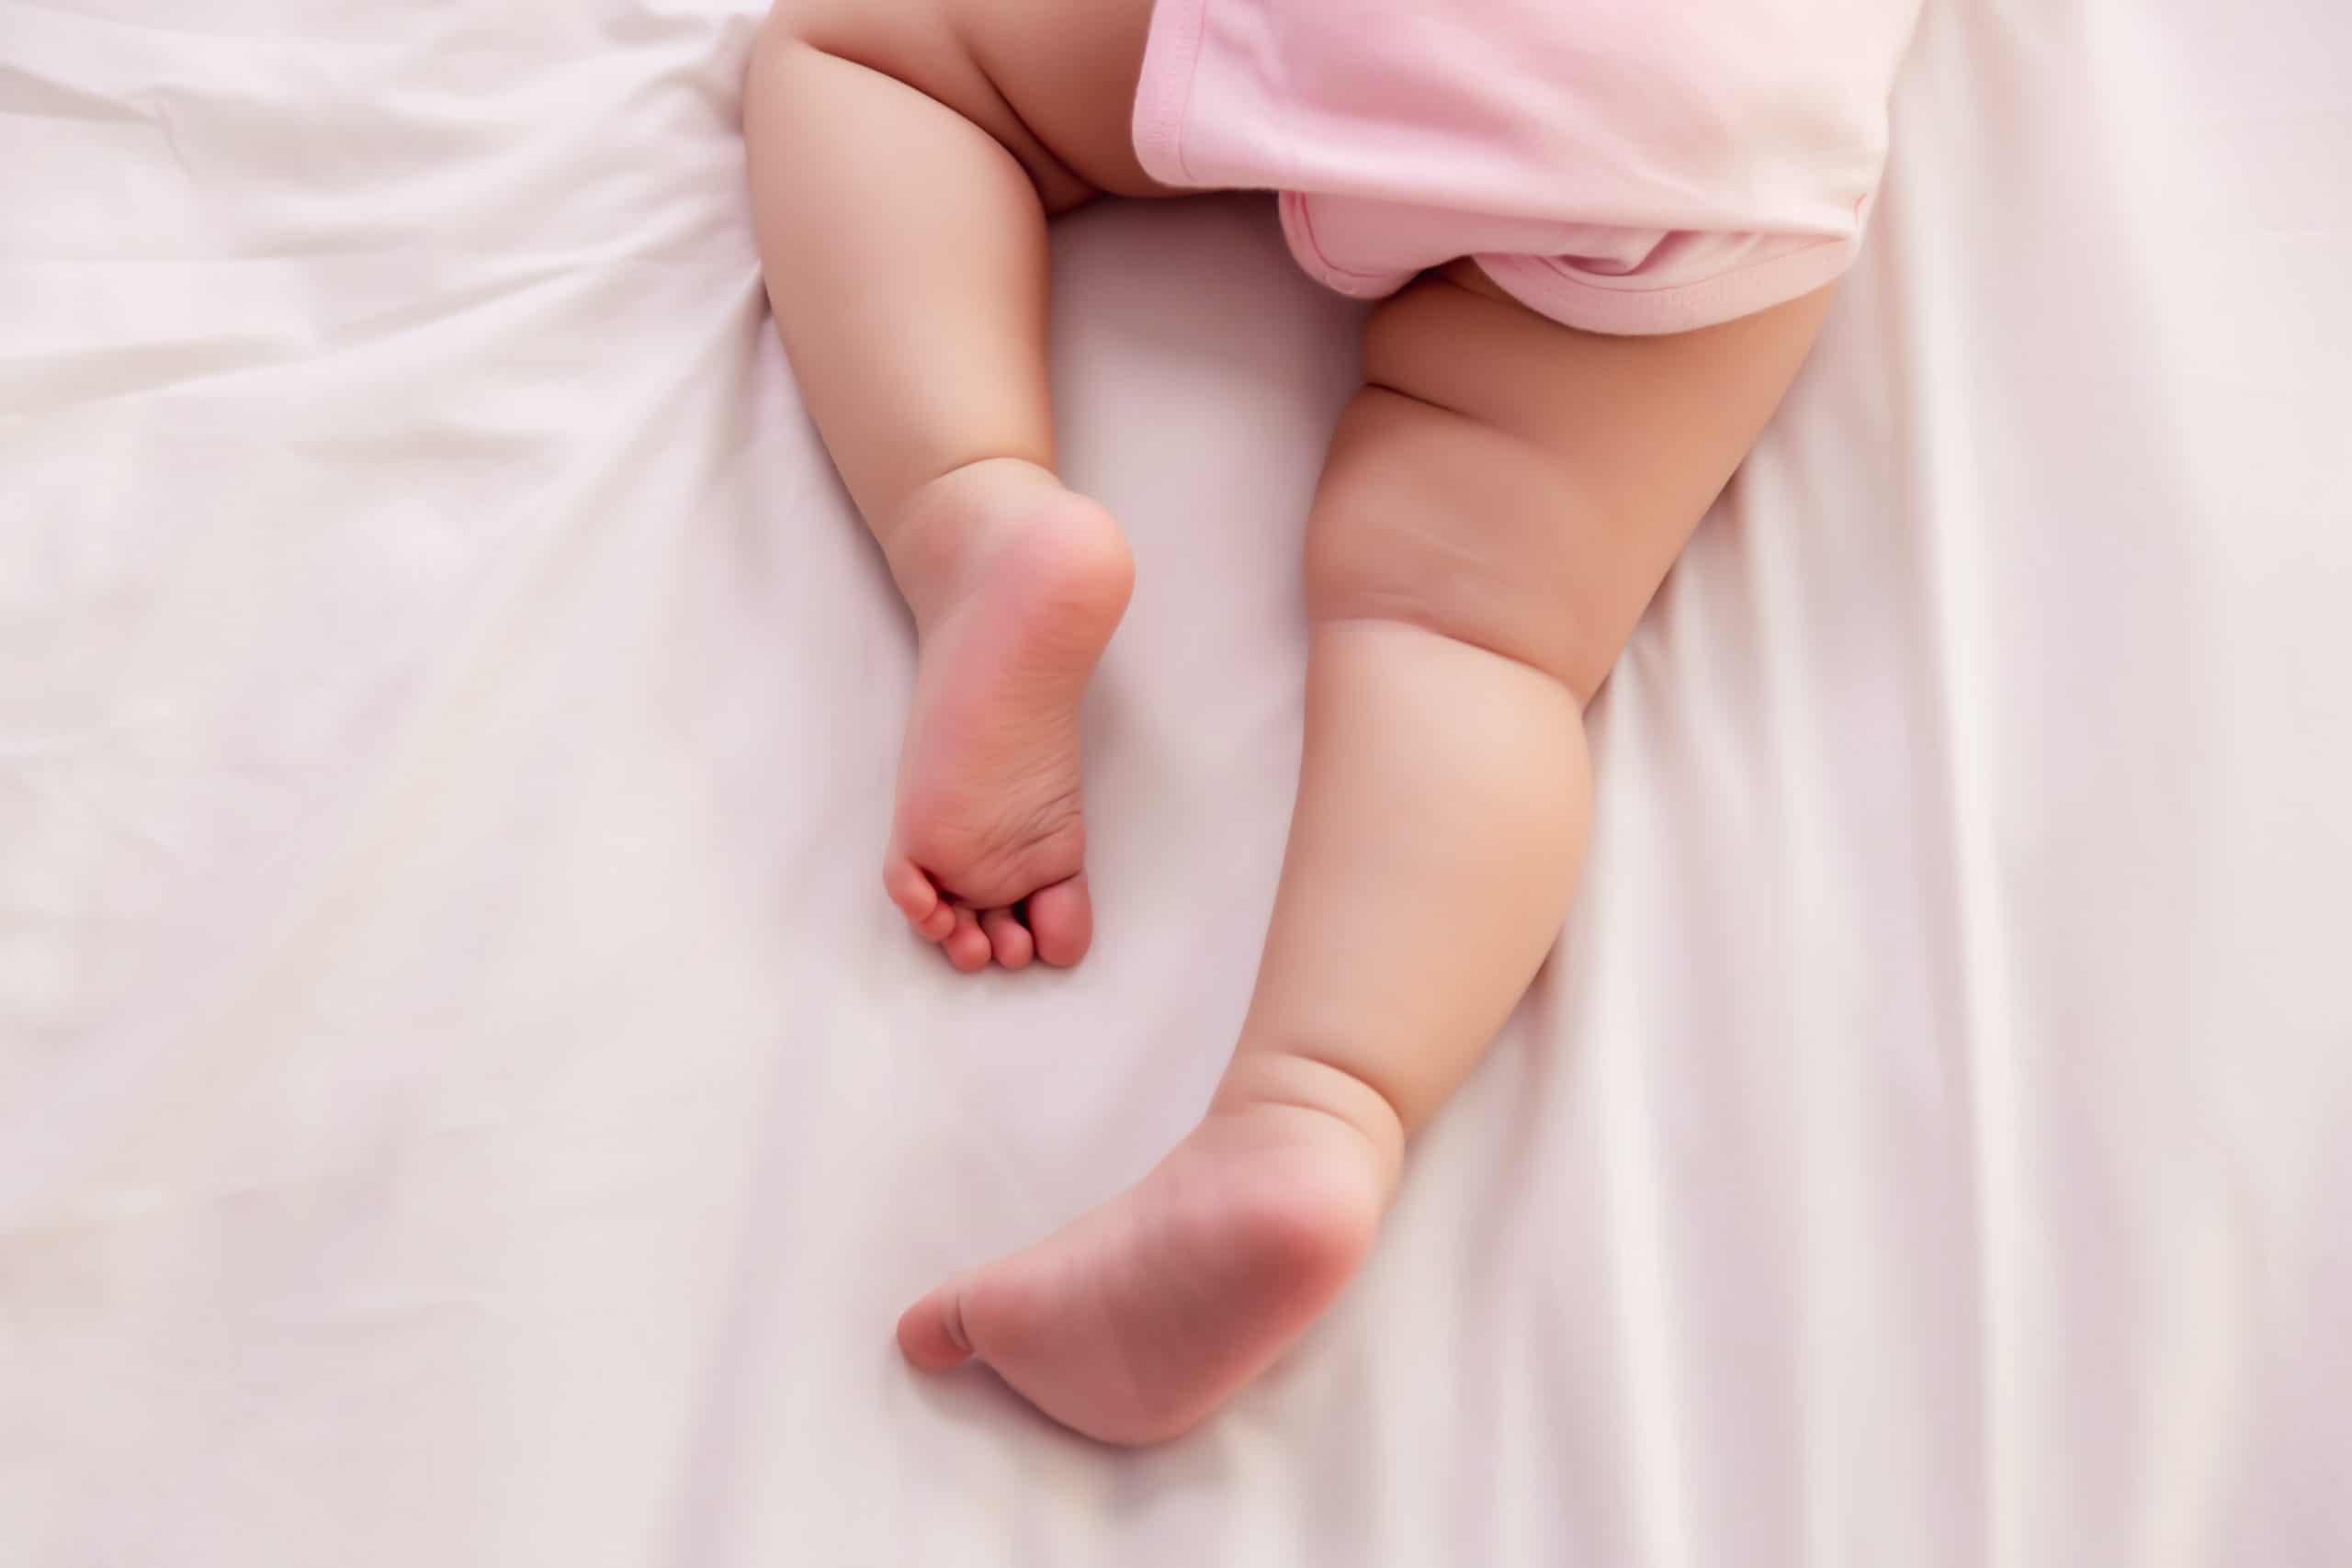 When do toddlers stop napping?